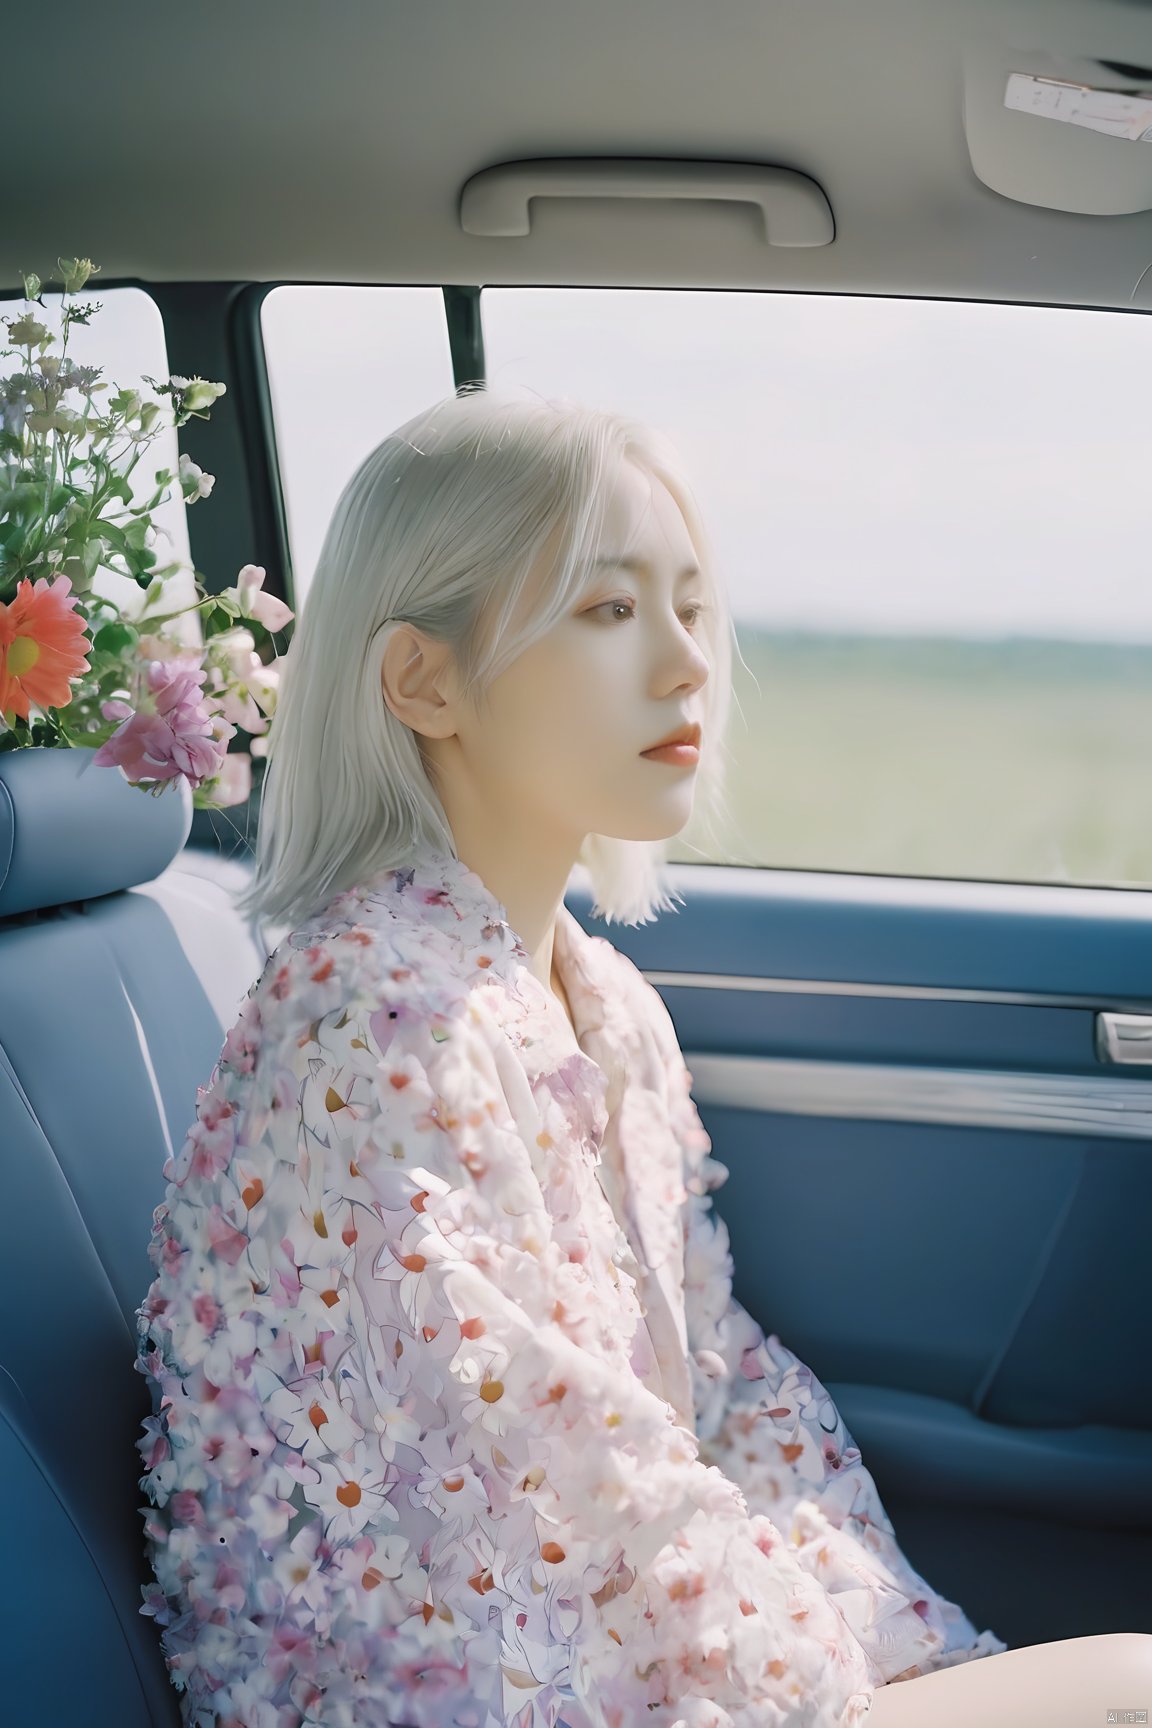  A young girl with white hair sitting in car filled with flowers,art by Rinko Kawauchi,in the styleof naturalistic poses,vacation dadcore,youth fulenergy,a coolexpression,body extensions,flowers in the sky,analog film,super detail,dreamy lofiphotography,(colourful),covered in flowers anovines,(Inside view:1.5),shot on fuiifilm XT4,Inside car,(red|yellow|orange|purple|blue flower),a large number of flowers grow inside the car,a scene full of illusions,perspective taken from the interior of a car,the girl leaned lazily in the car,white hair,